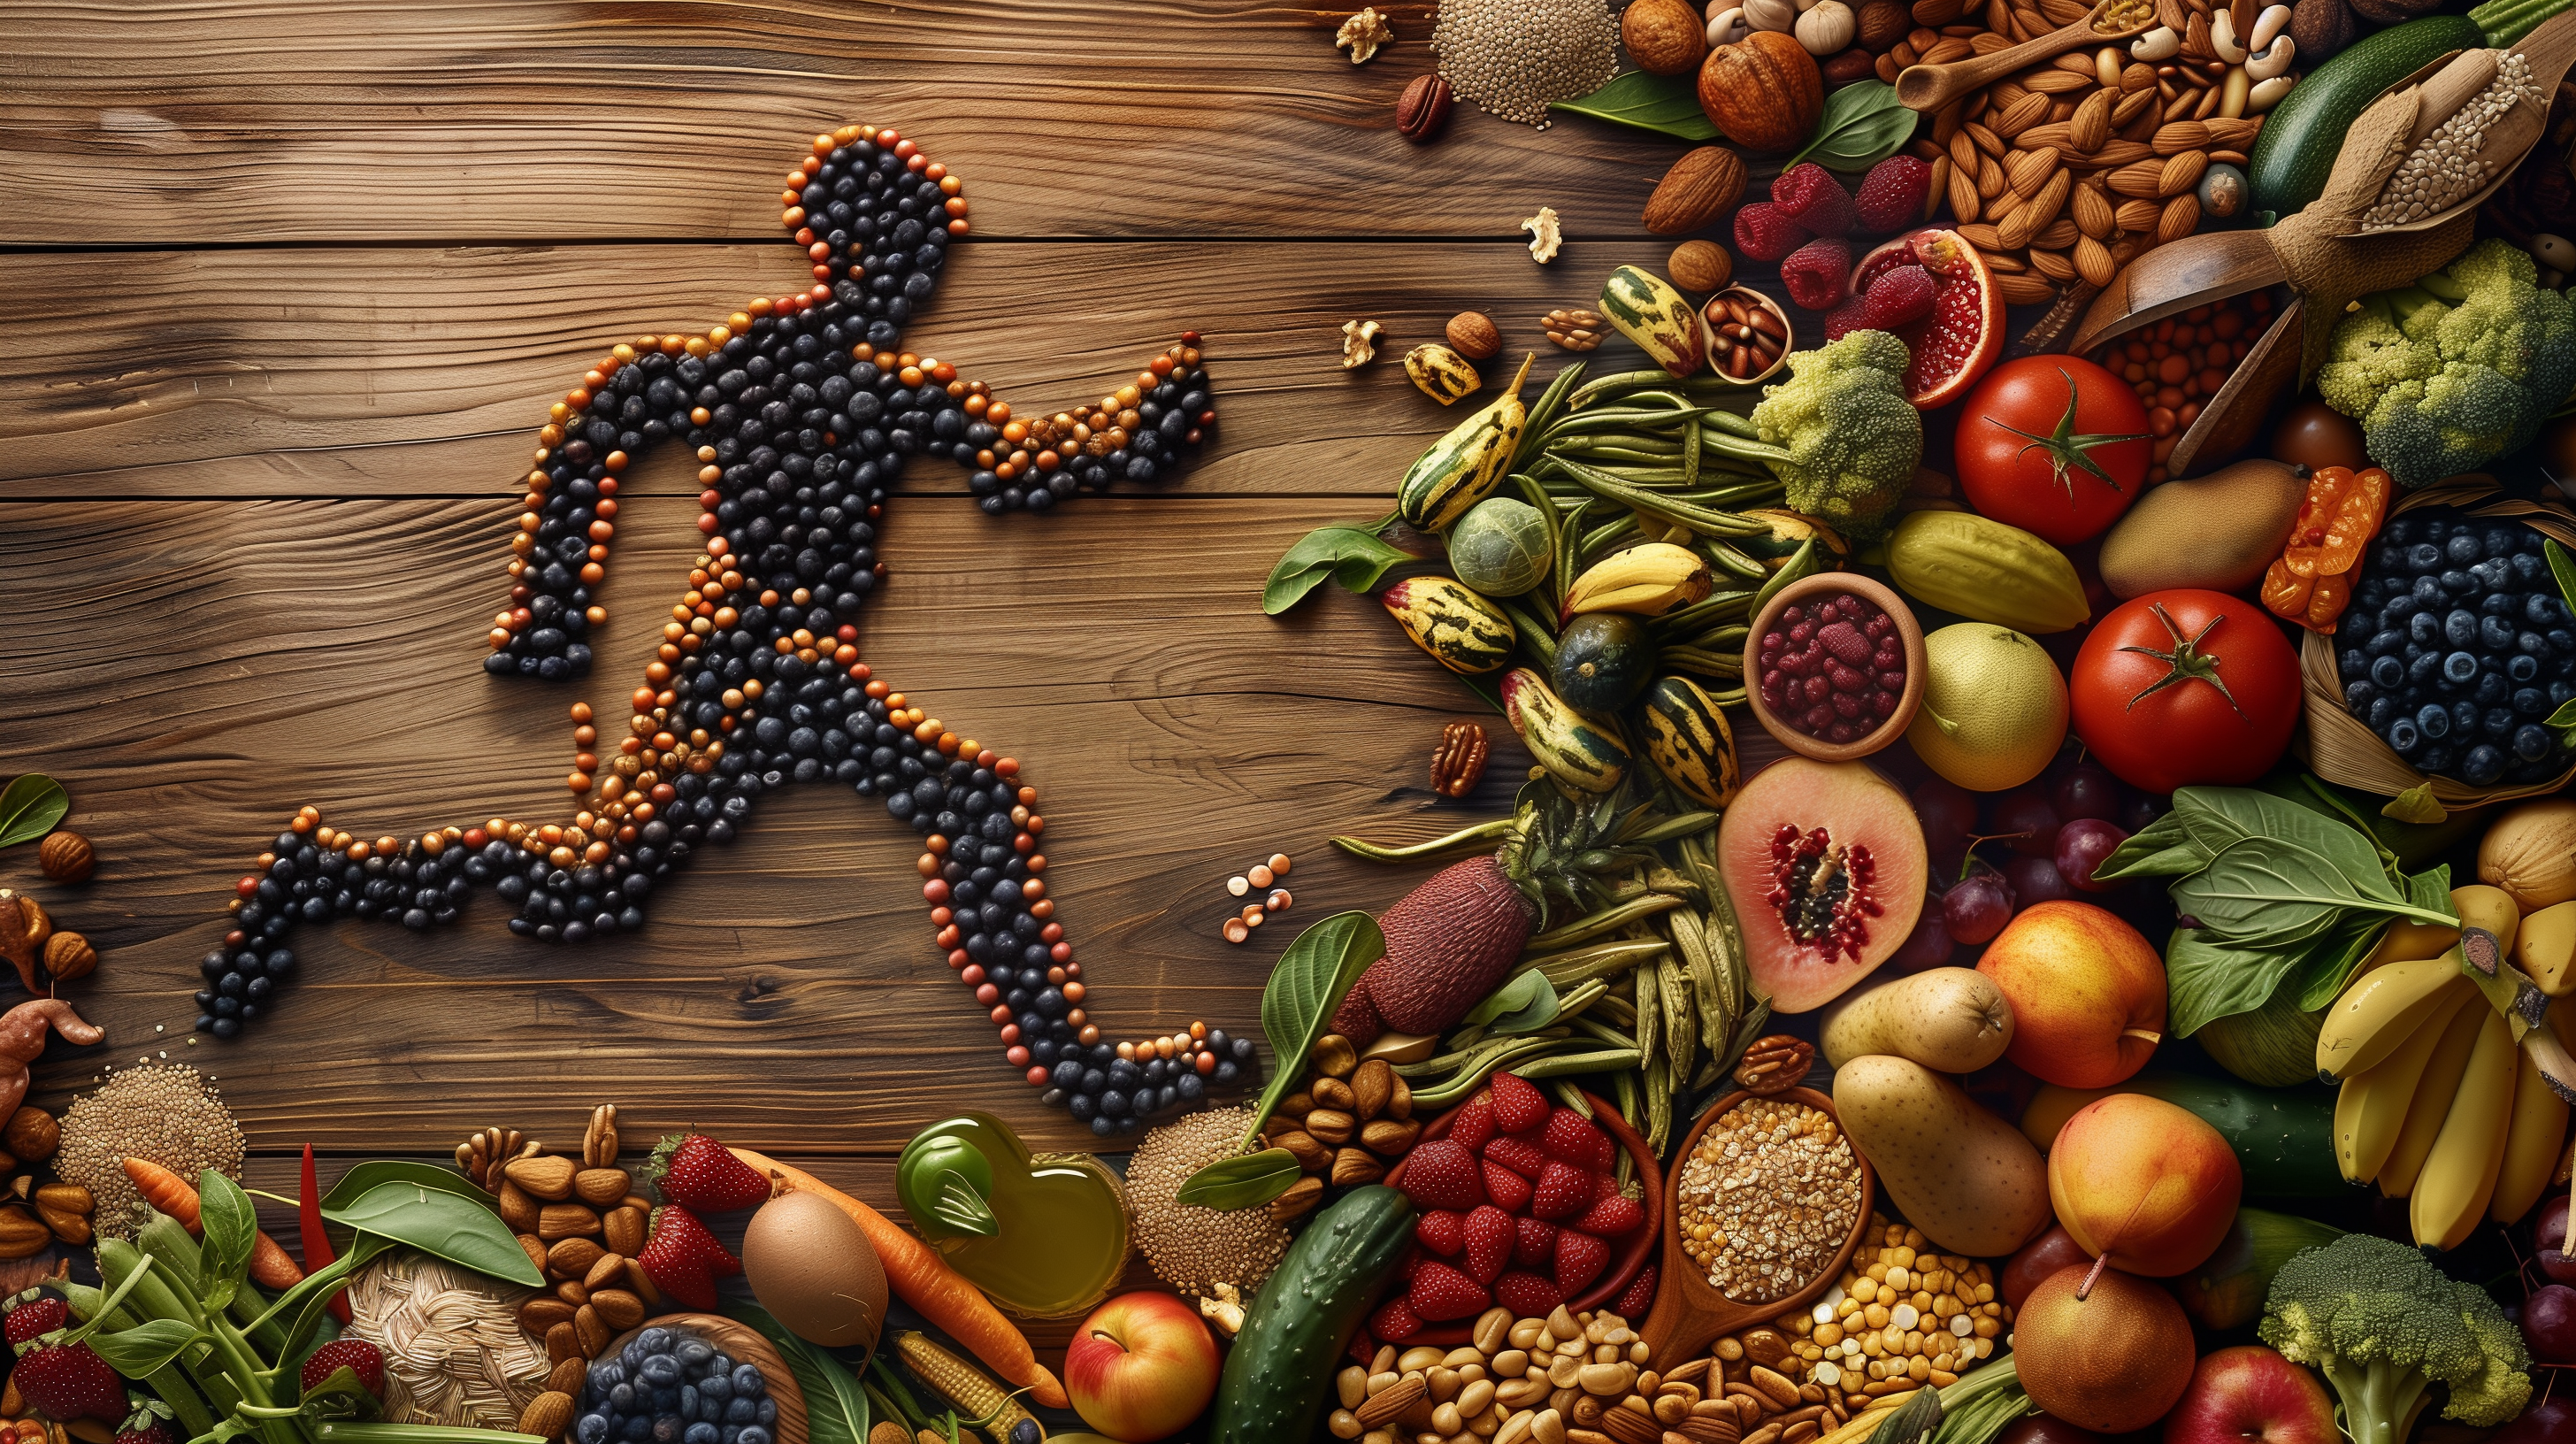 variety of whole grains, fruits, and vegetables artistically arranged around a silhouette of a running athlete